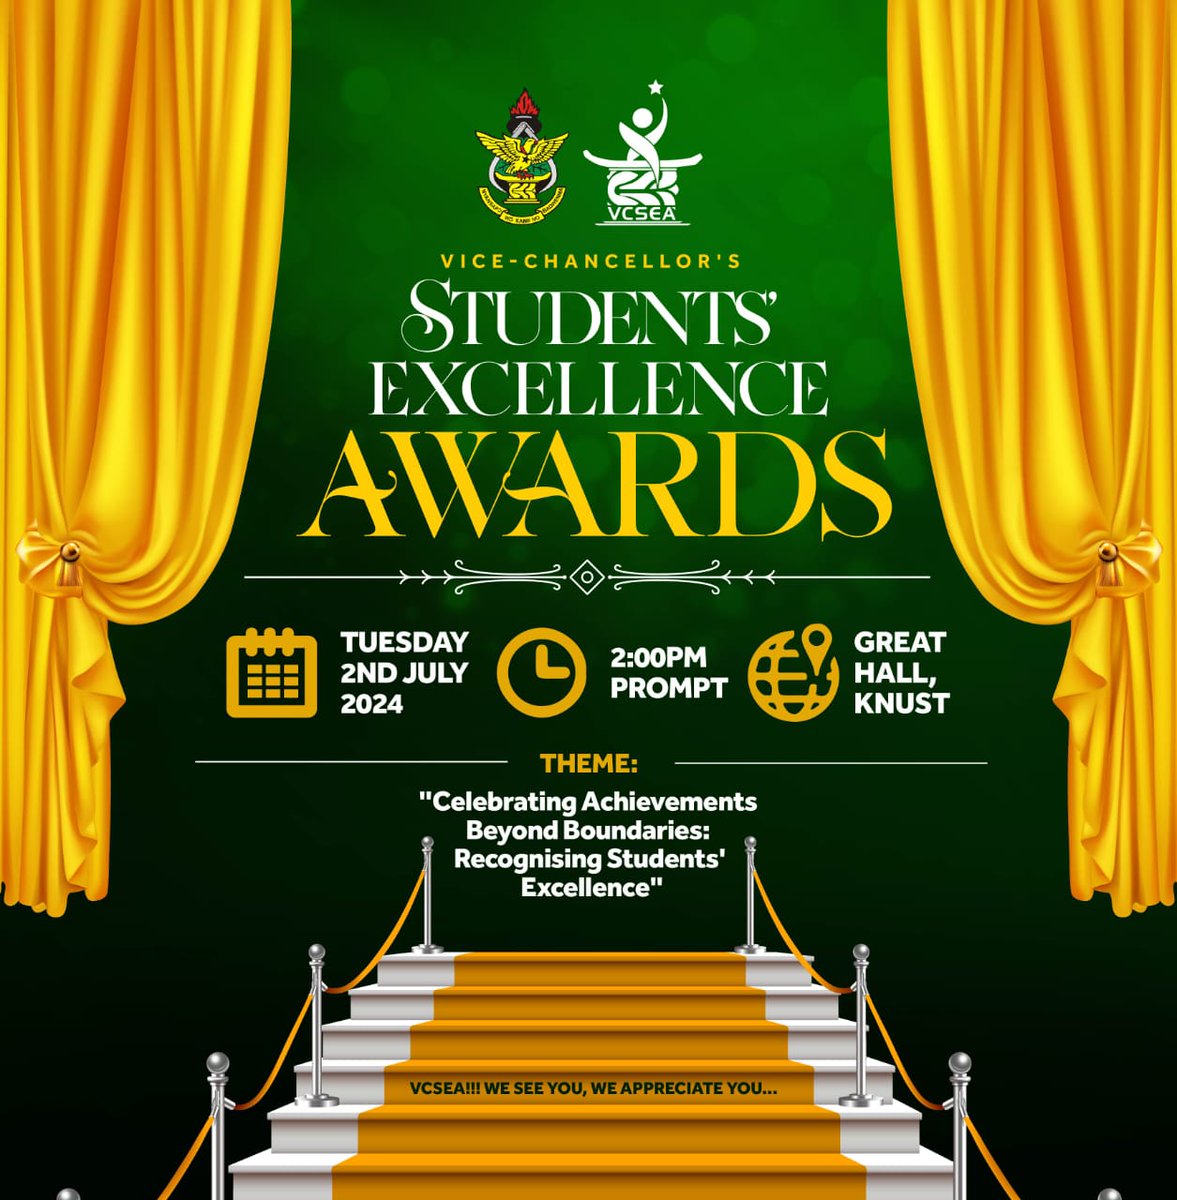 Students are invited to the second edition of the Vice-Chancellor's Students' Excellence Awards, themed 'Celebrating Achievements Beyond Boundaries: Recognizing Students' Excellence.' The event will be held on July 2, 2024 at the Great Hall. #KNUSTNewsFile